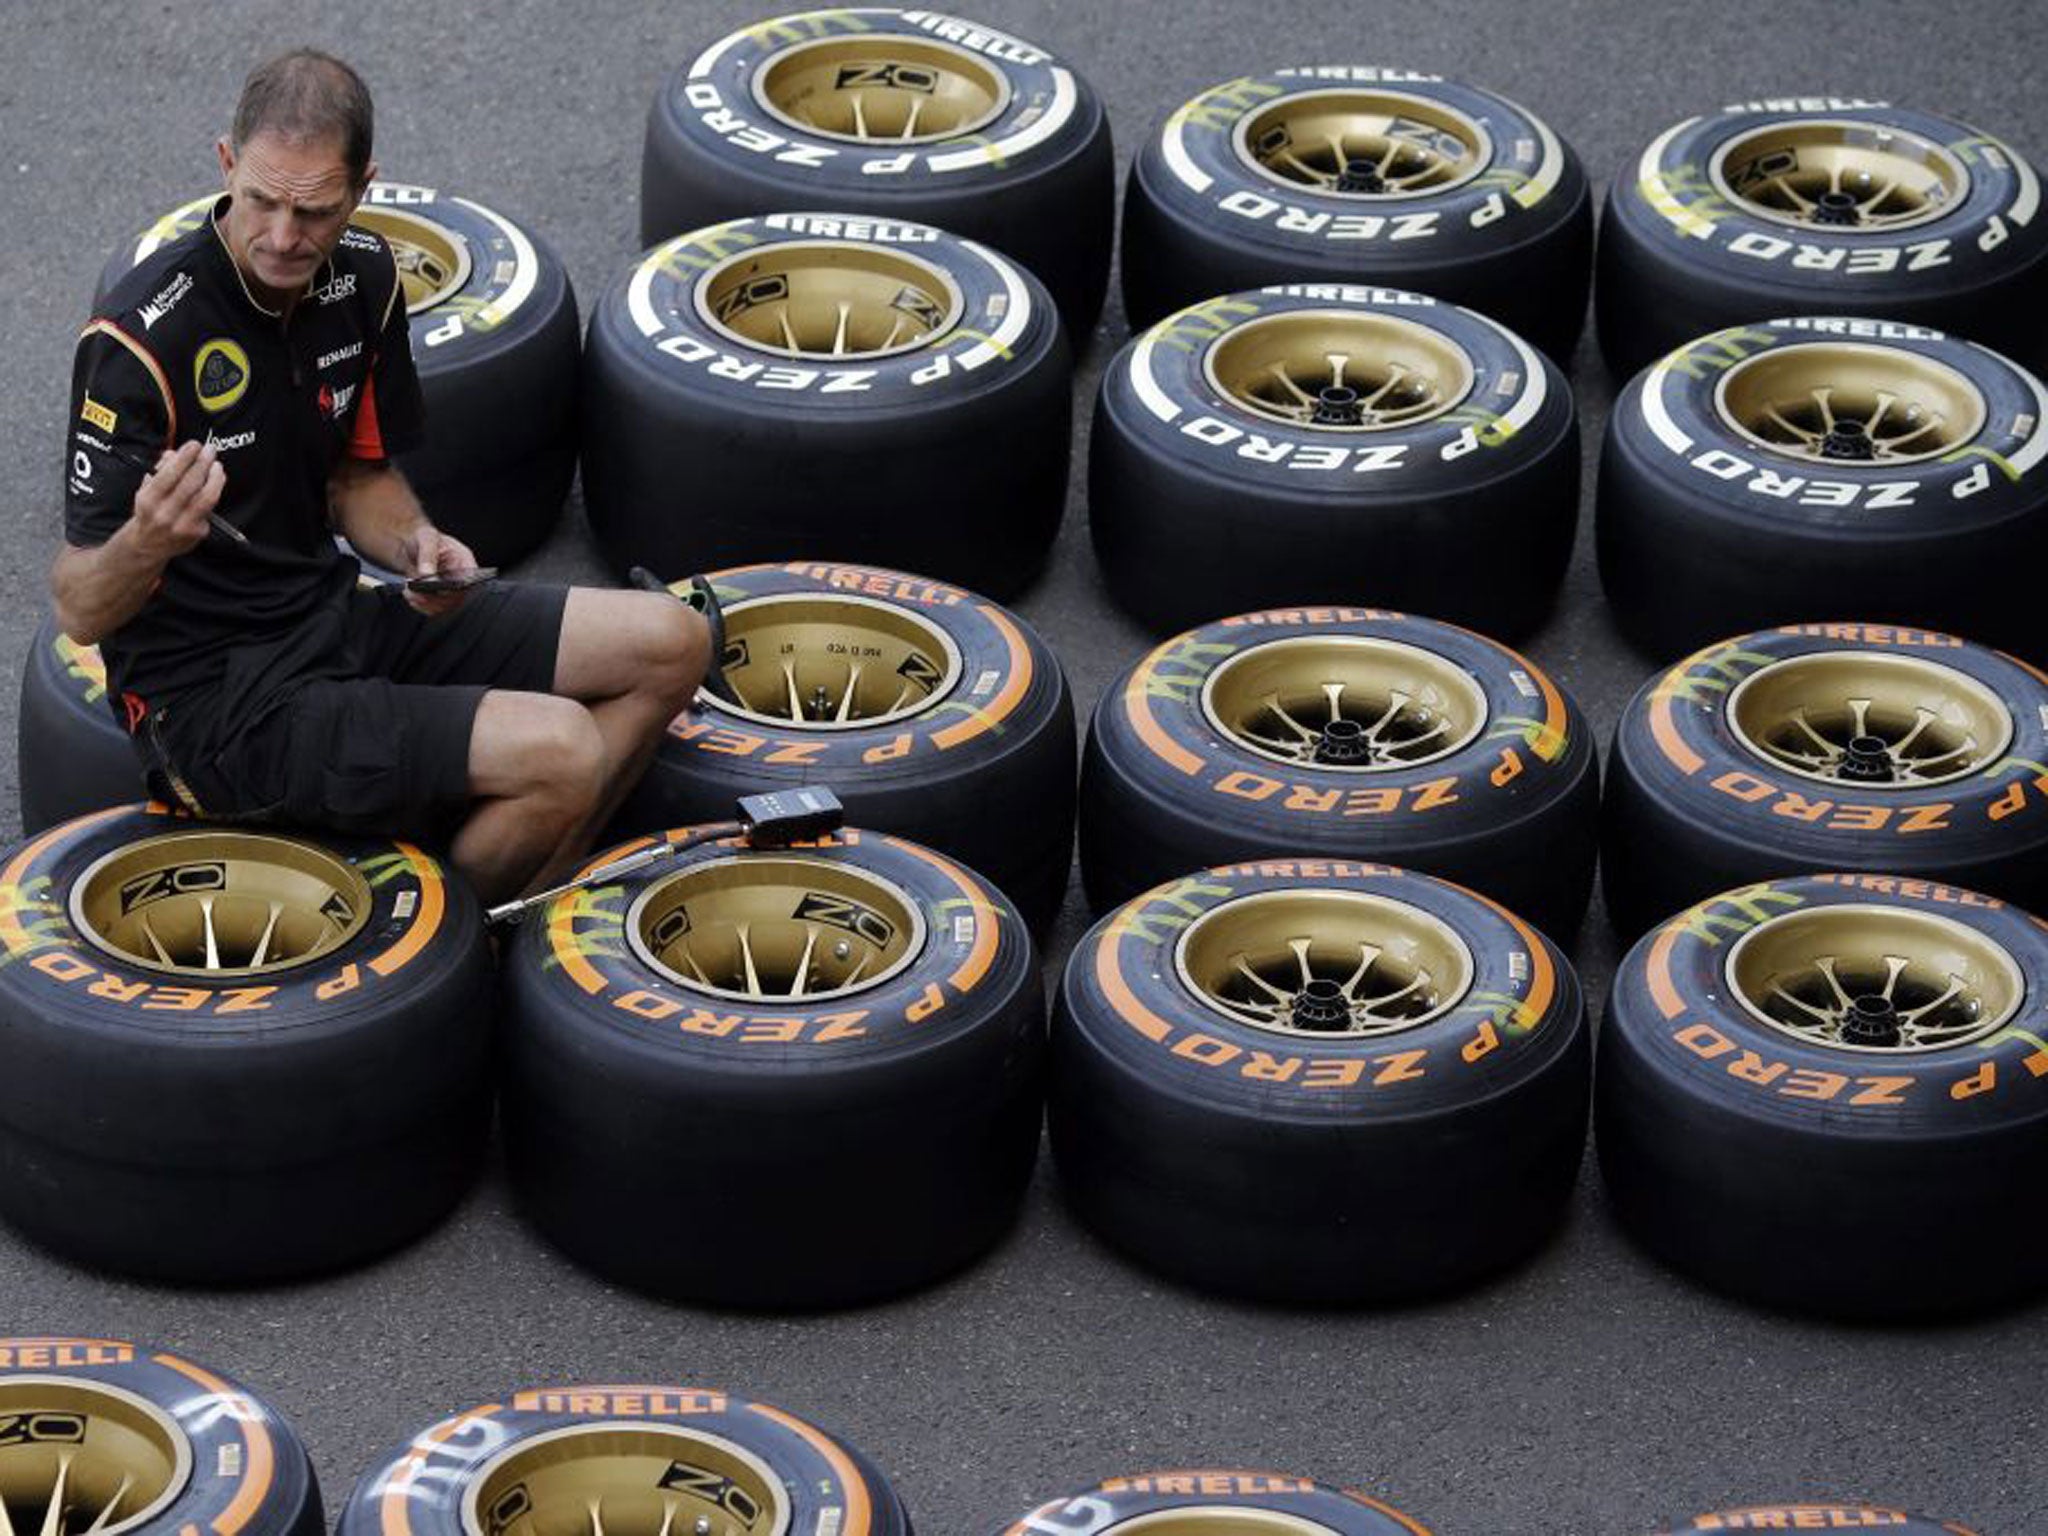 A Lotus mechanic checks tryes at the track yesterday ahead of this weekend’s Belgian Grand Prix